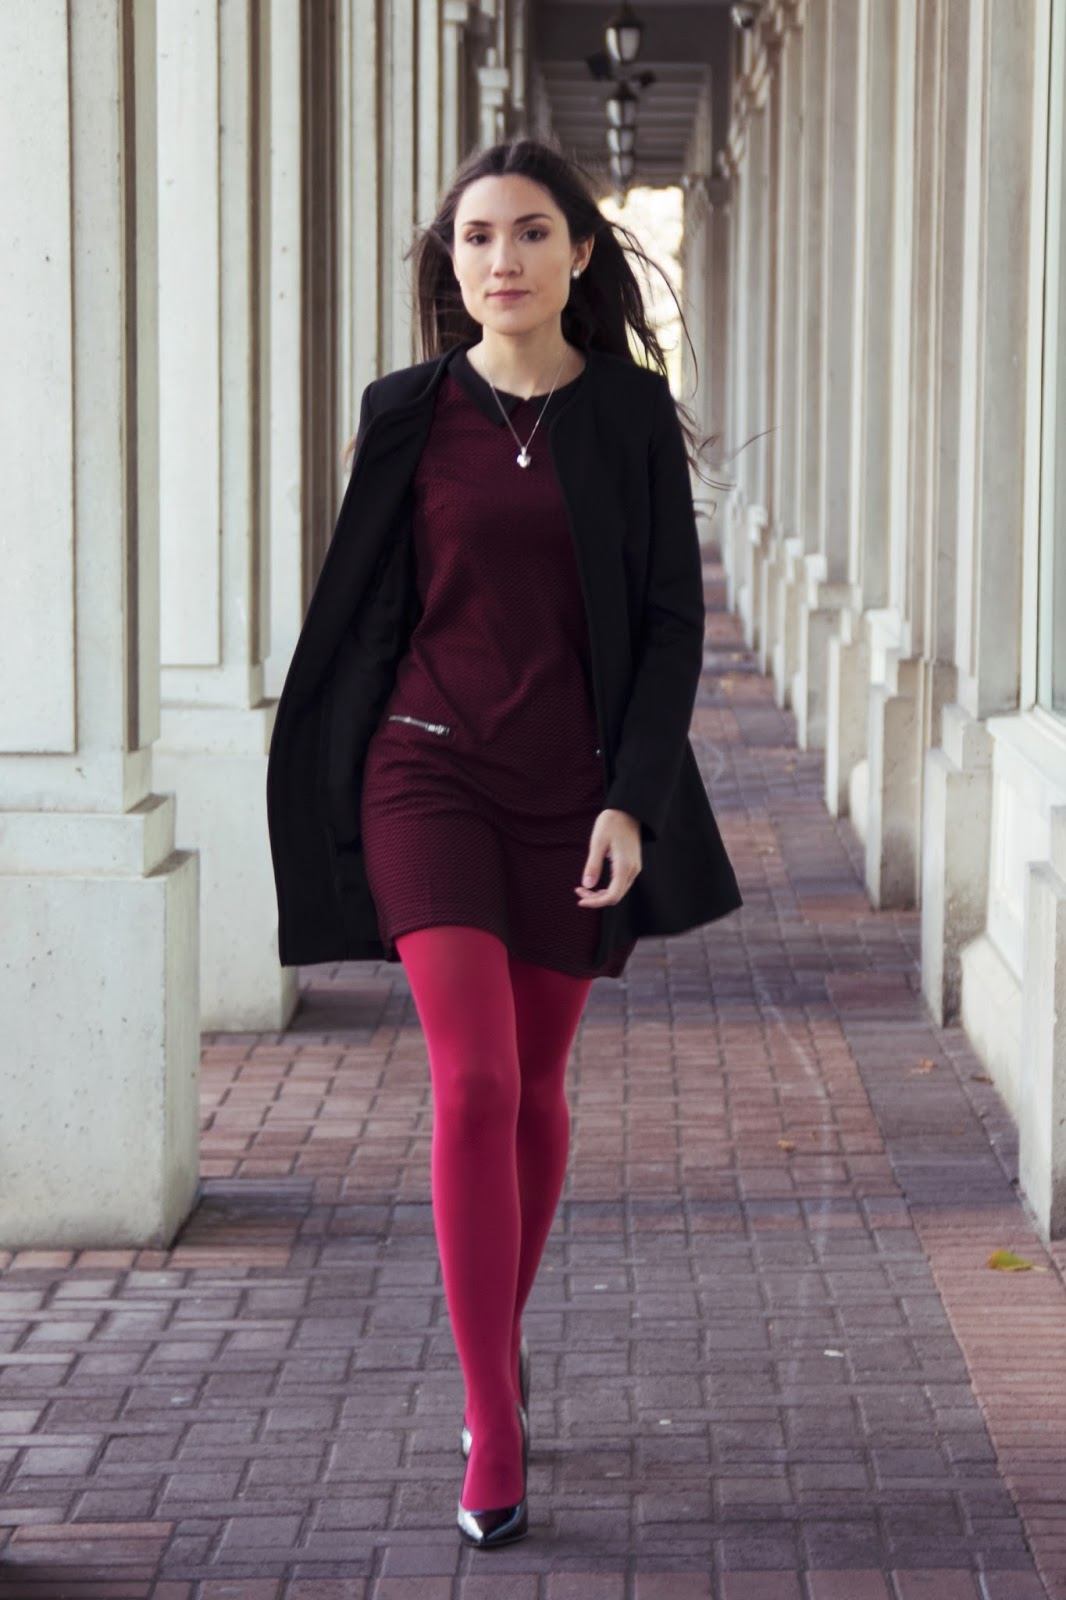 Tips For Wearing Bright Tights Fashionmylegs The Tights And Hosiery Blog